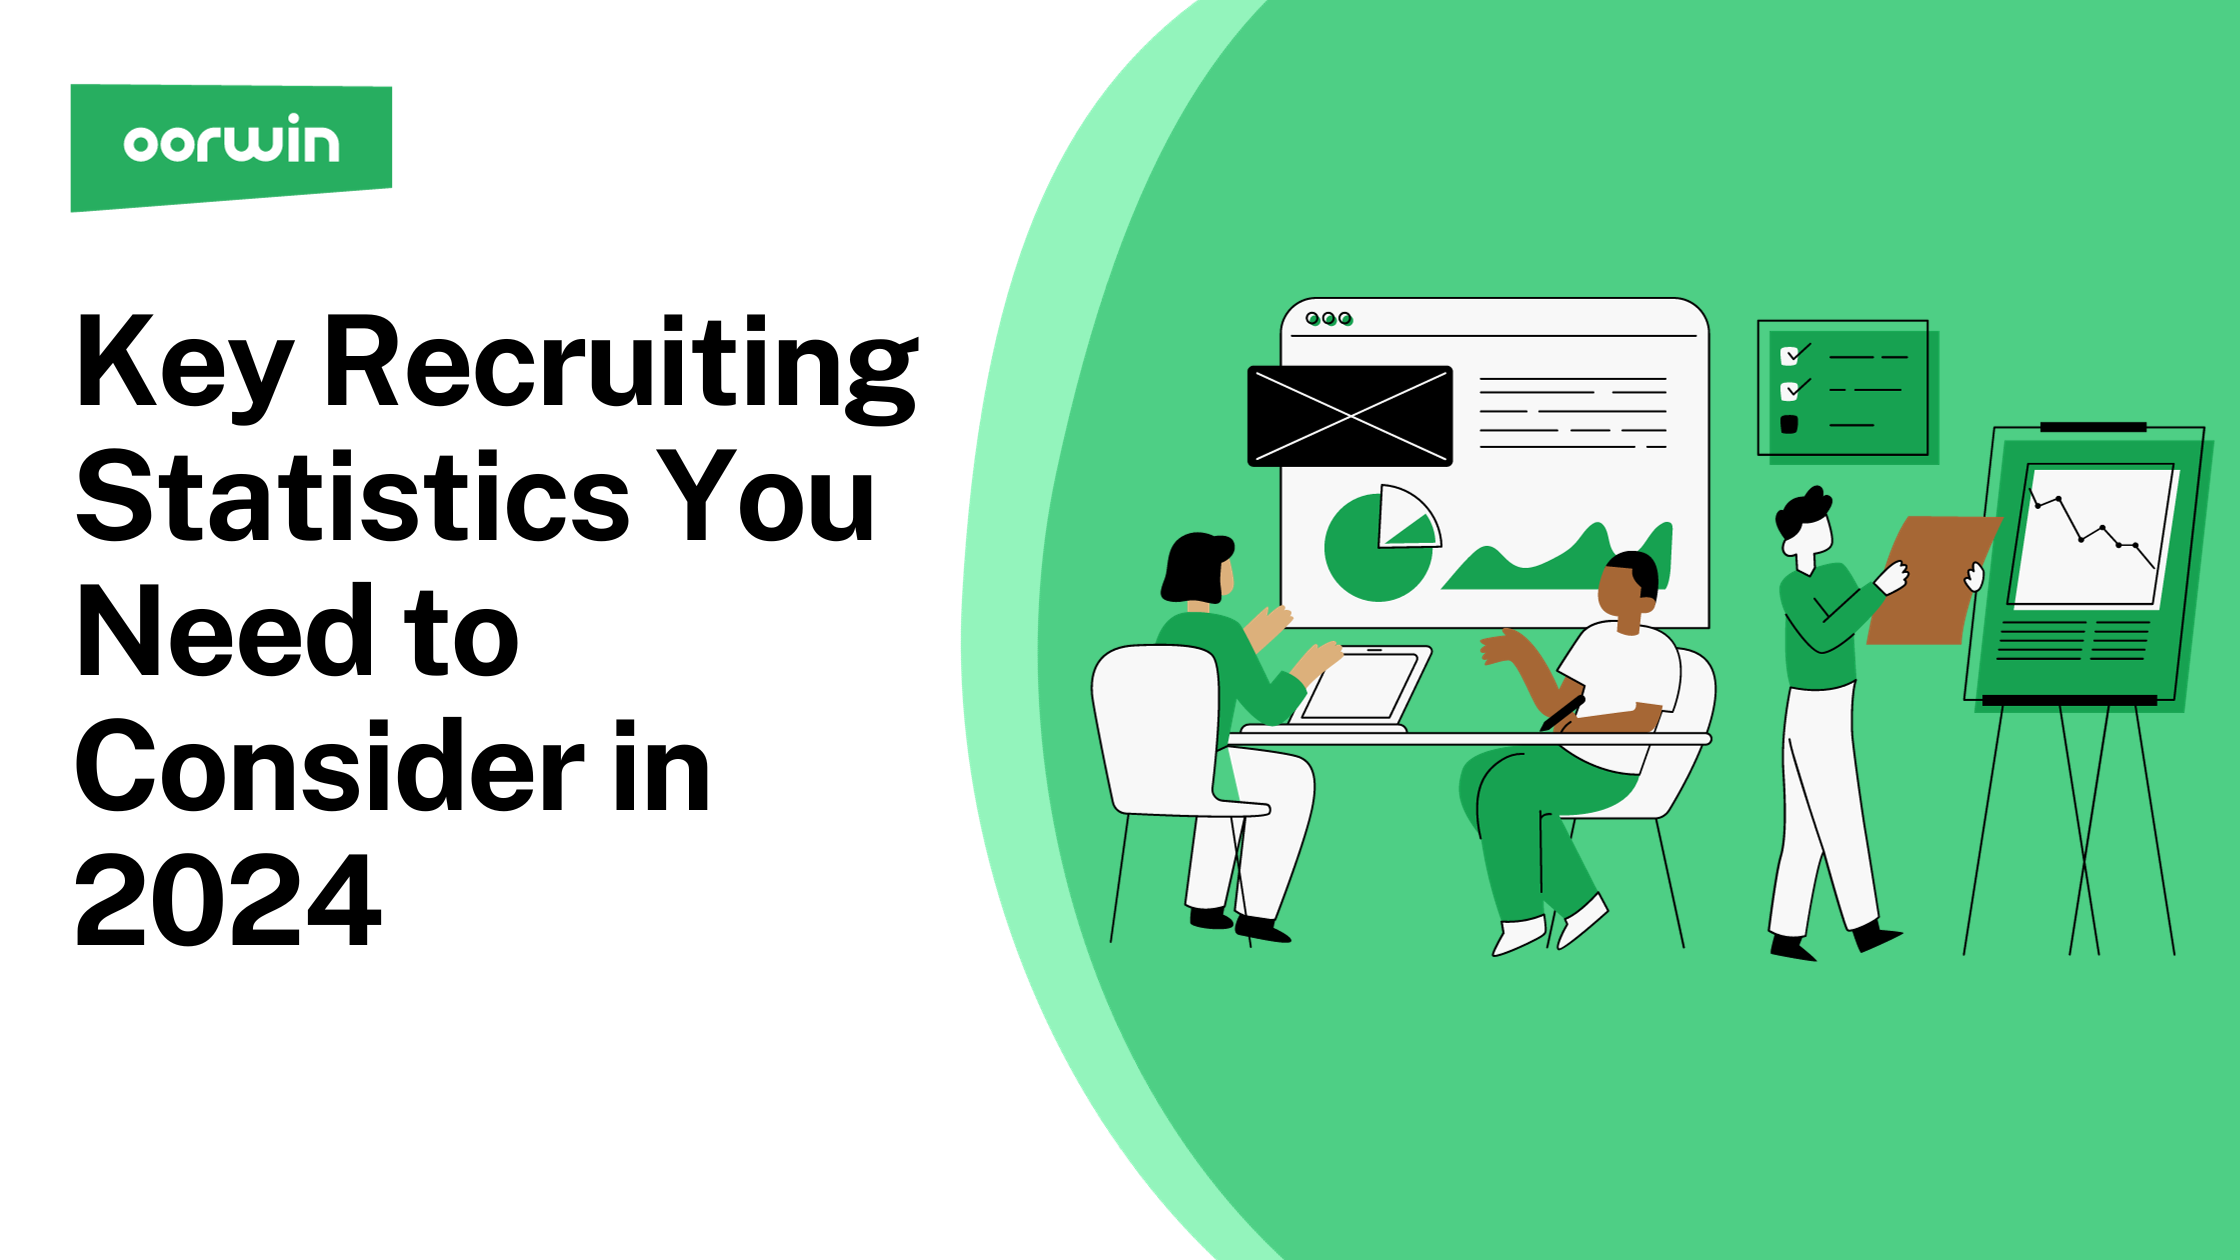 15 Key Recruiting Statistics You Need to Consider in 2024